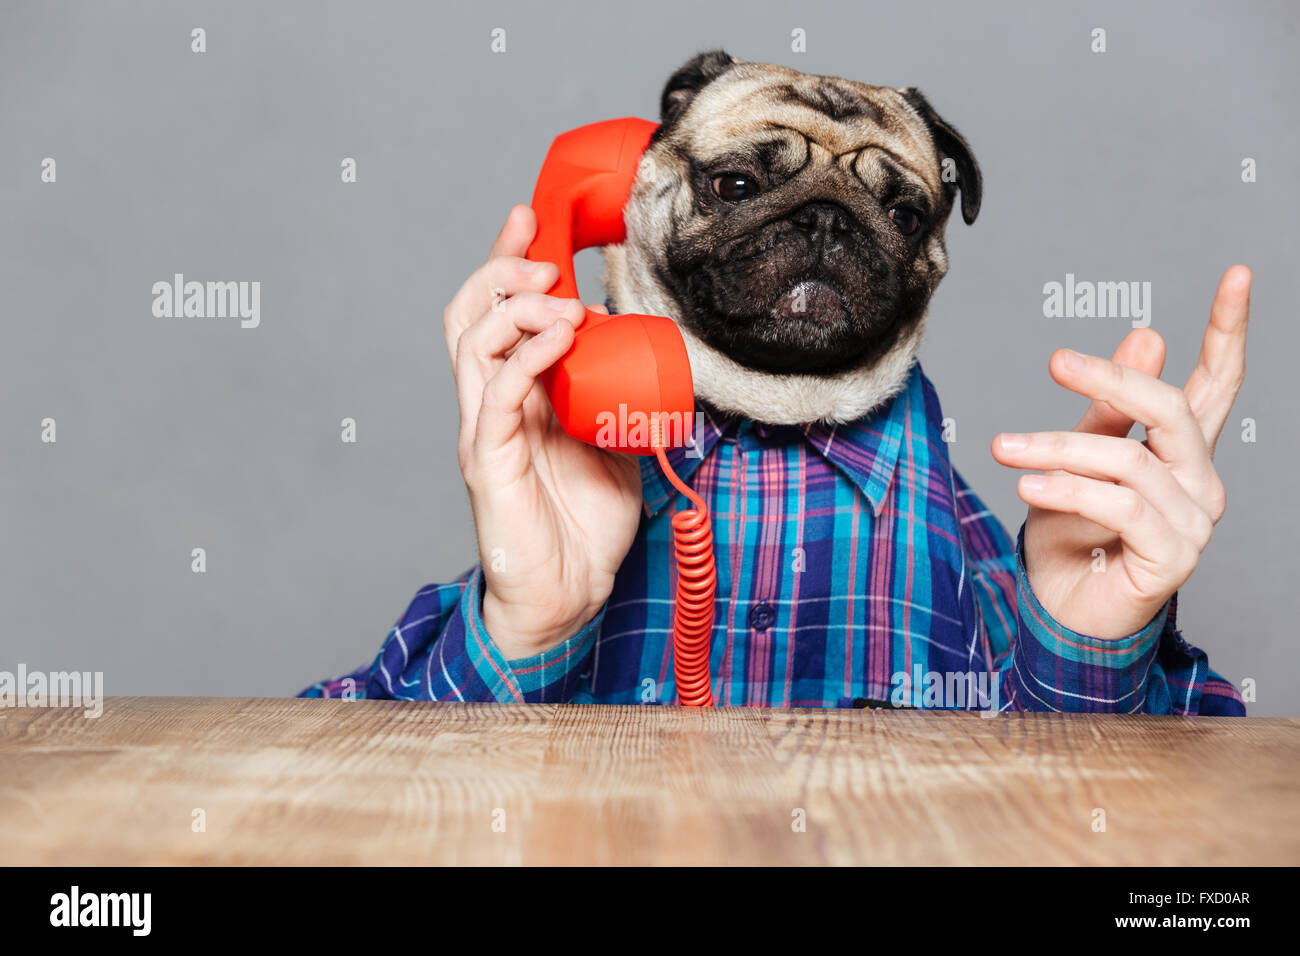 Serious man with pug dog head in checkered shirt talking on telephone over grey background Stock Photo